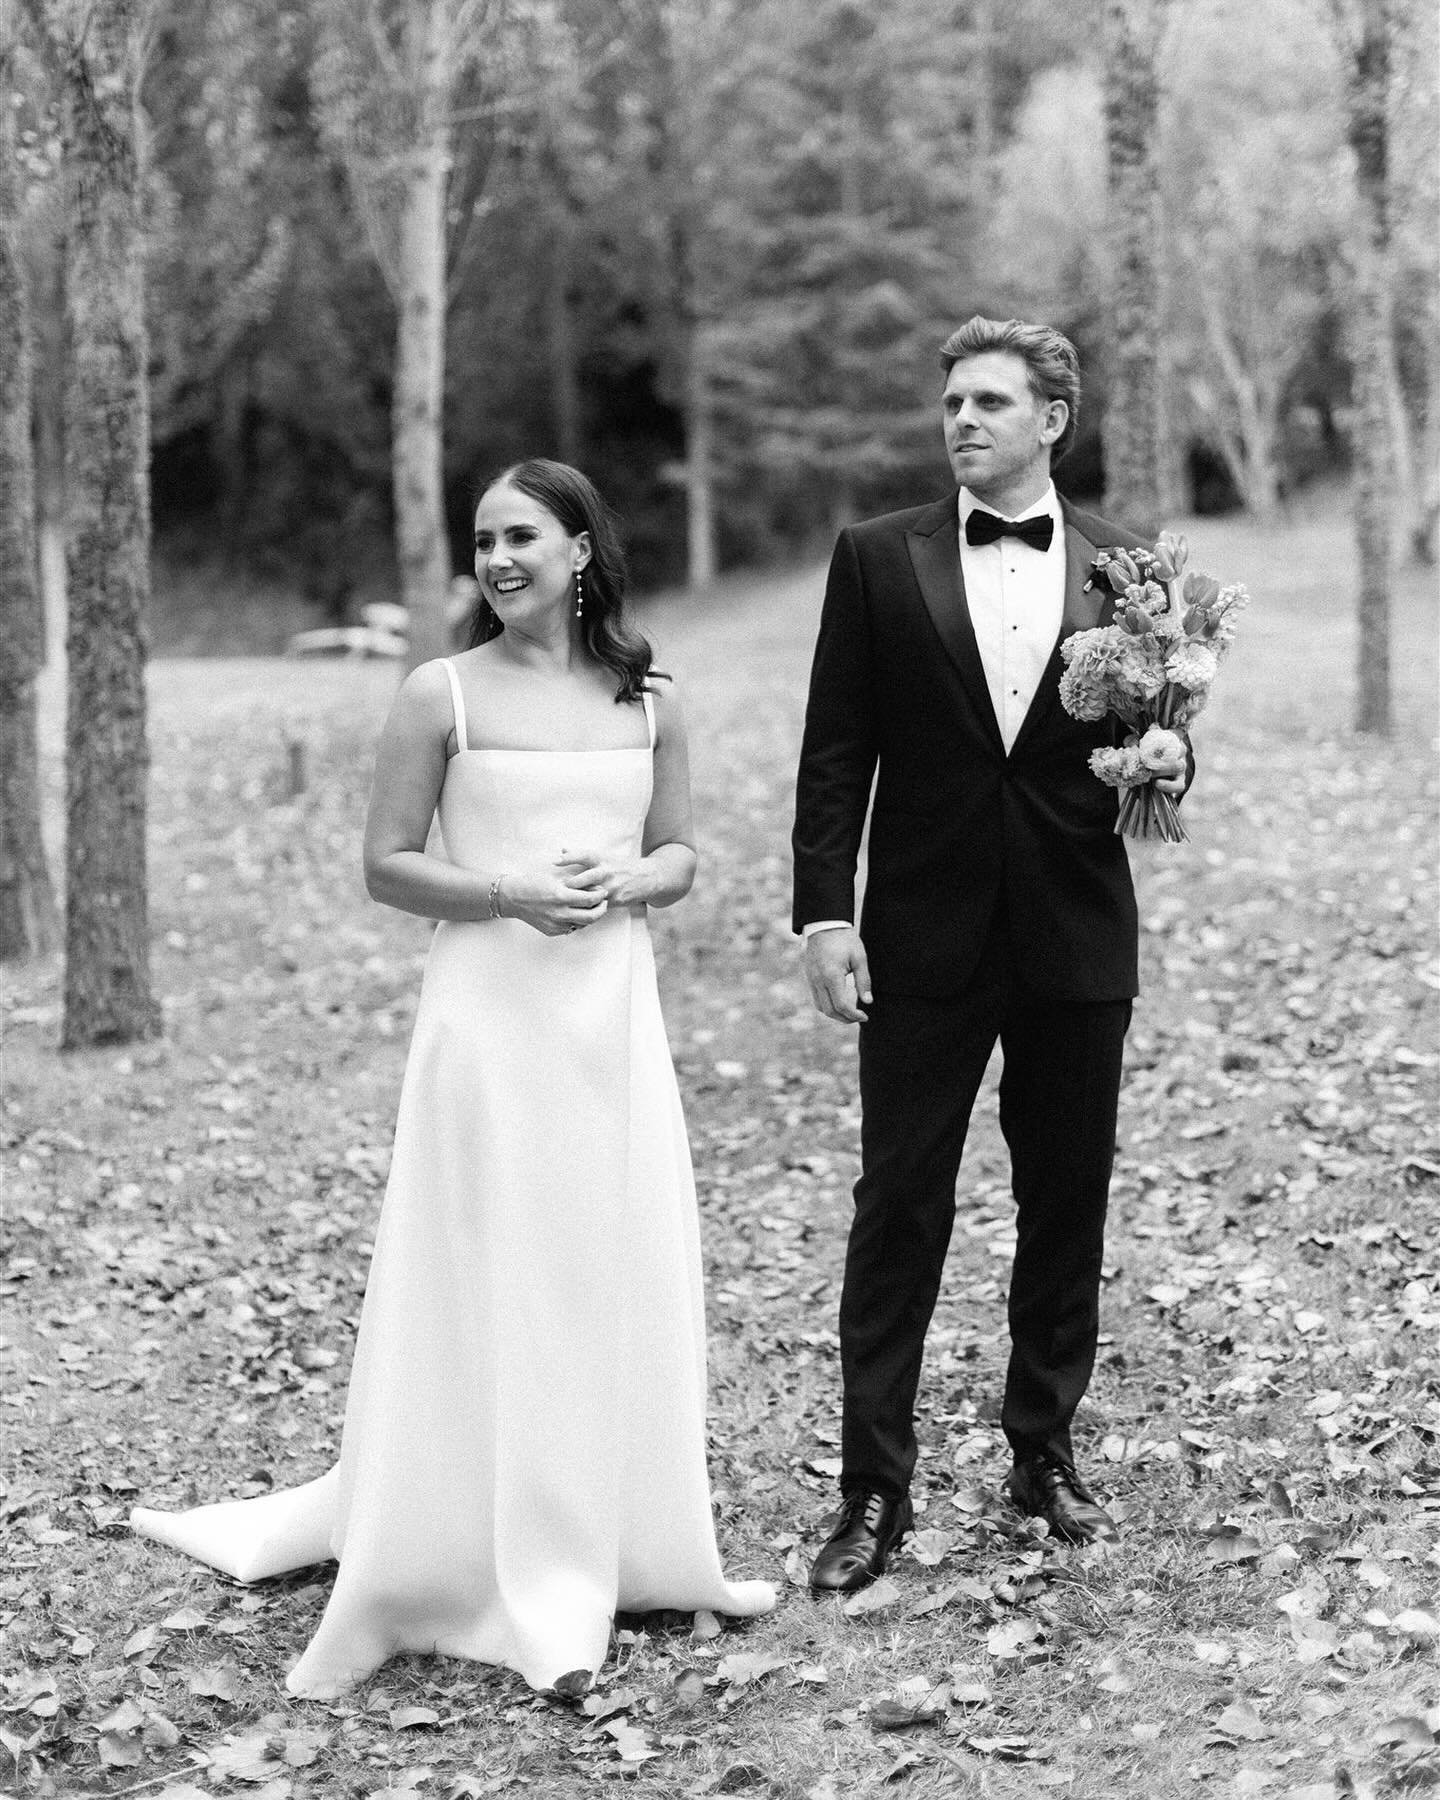 Black and white moments from Samantha and Sam&rsquo;s wedding day last month 🖤🤍

Photography @nataliemcnally_ 
Styling, Hire and Co-ordination @flockevents 
Catering @ortonshawkesbay 
Dress @kennyandharlowbridal 
Marquee @flagship_events 
Venue @th